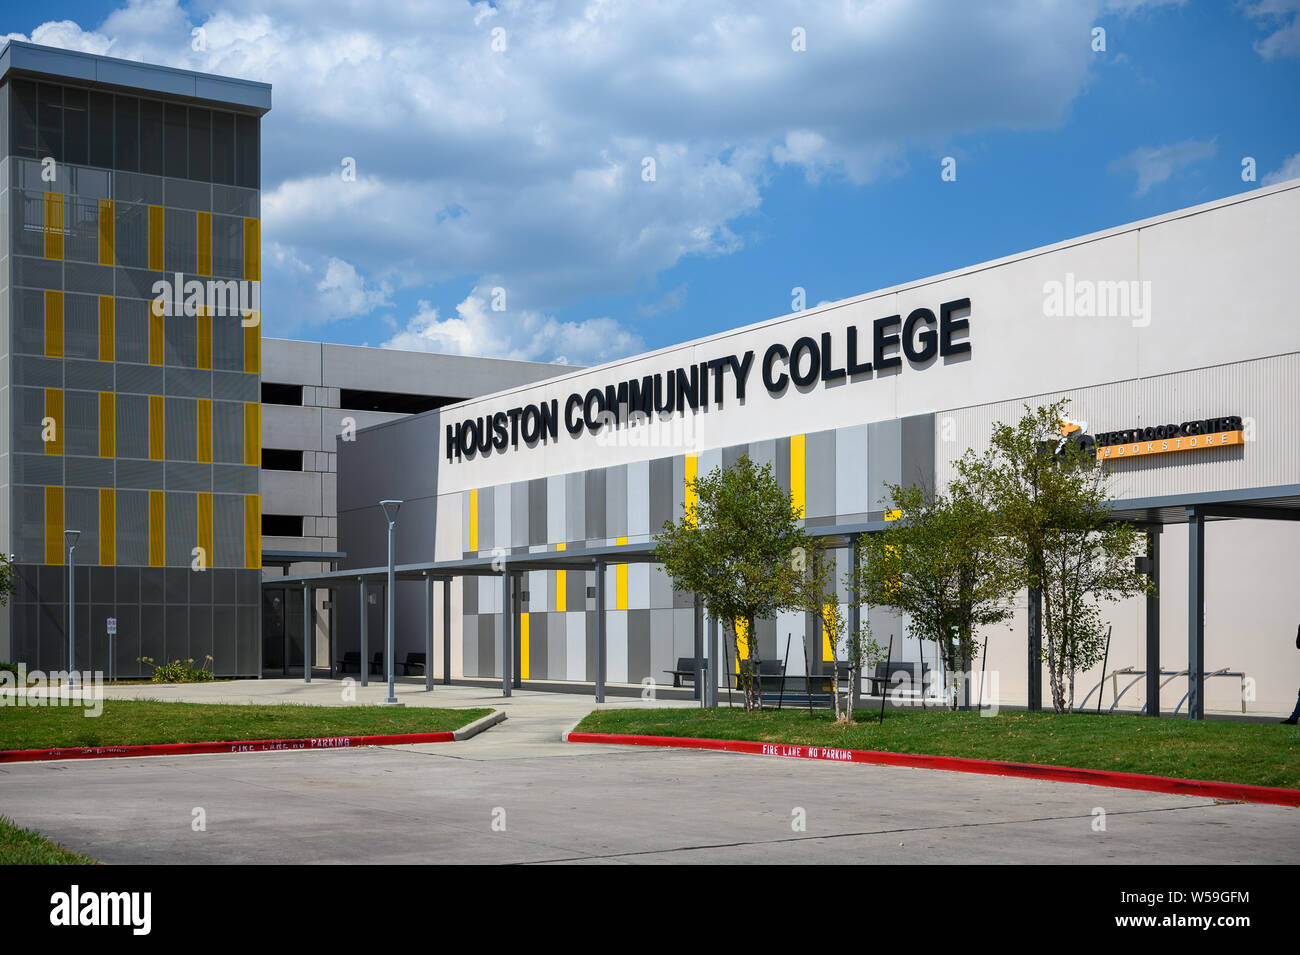 Houston, Texas - June 26, 2019: Houston Community College (HCC), West Loop  Campus. HCC is an open-admission, public institution of higher education in  Stock Photo - Alamy